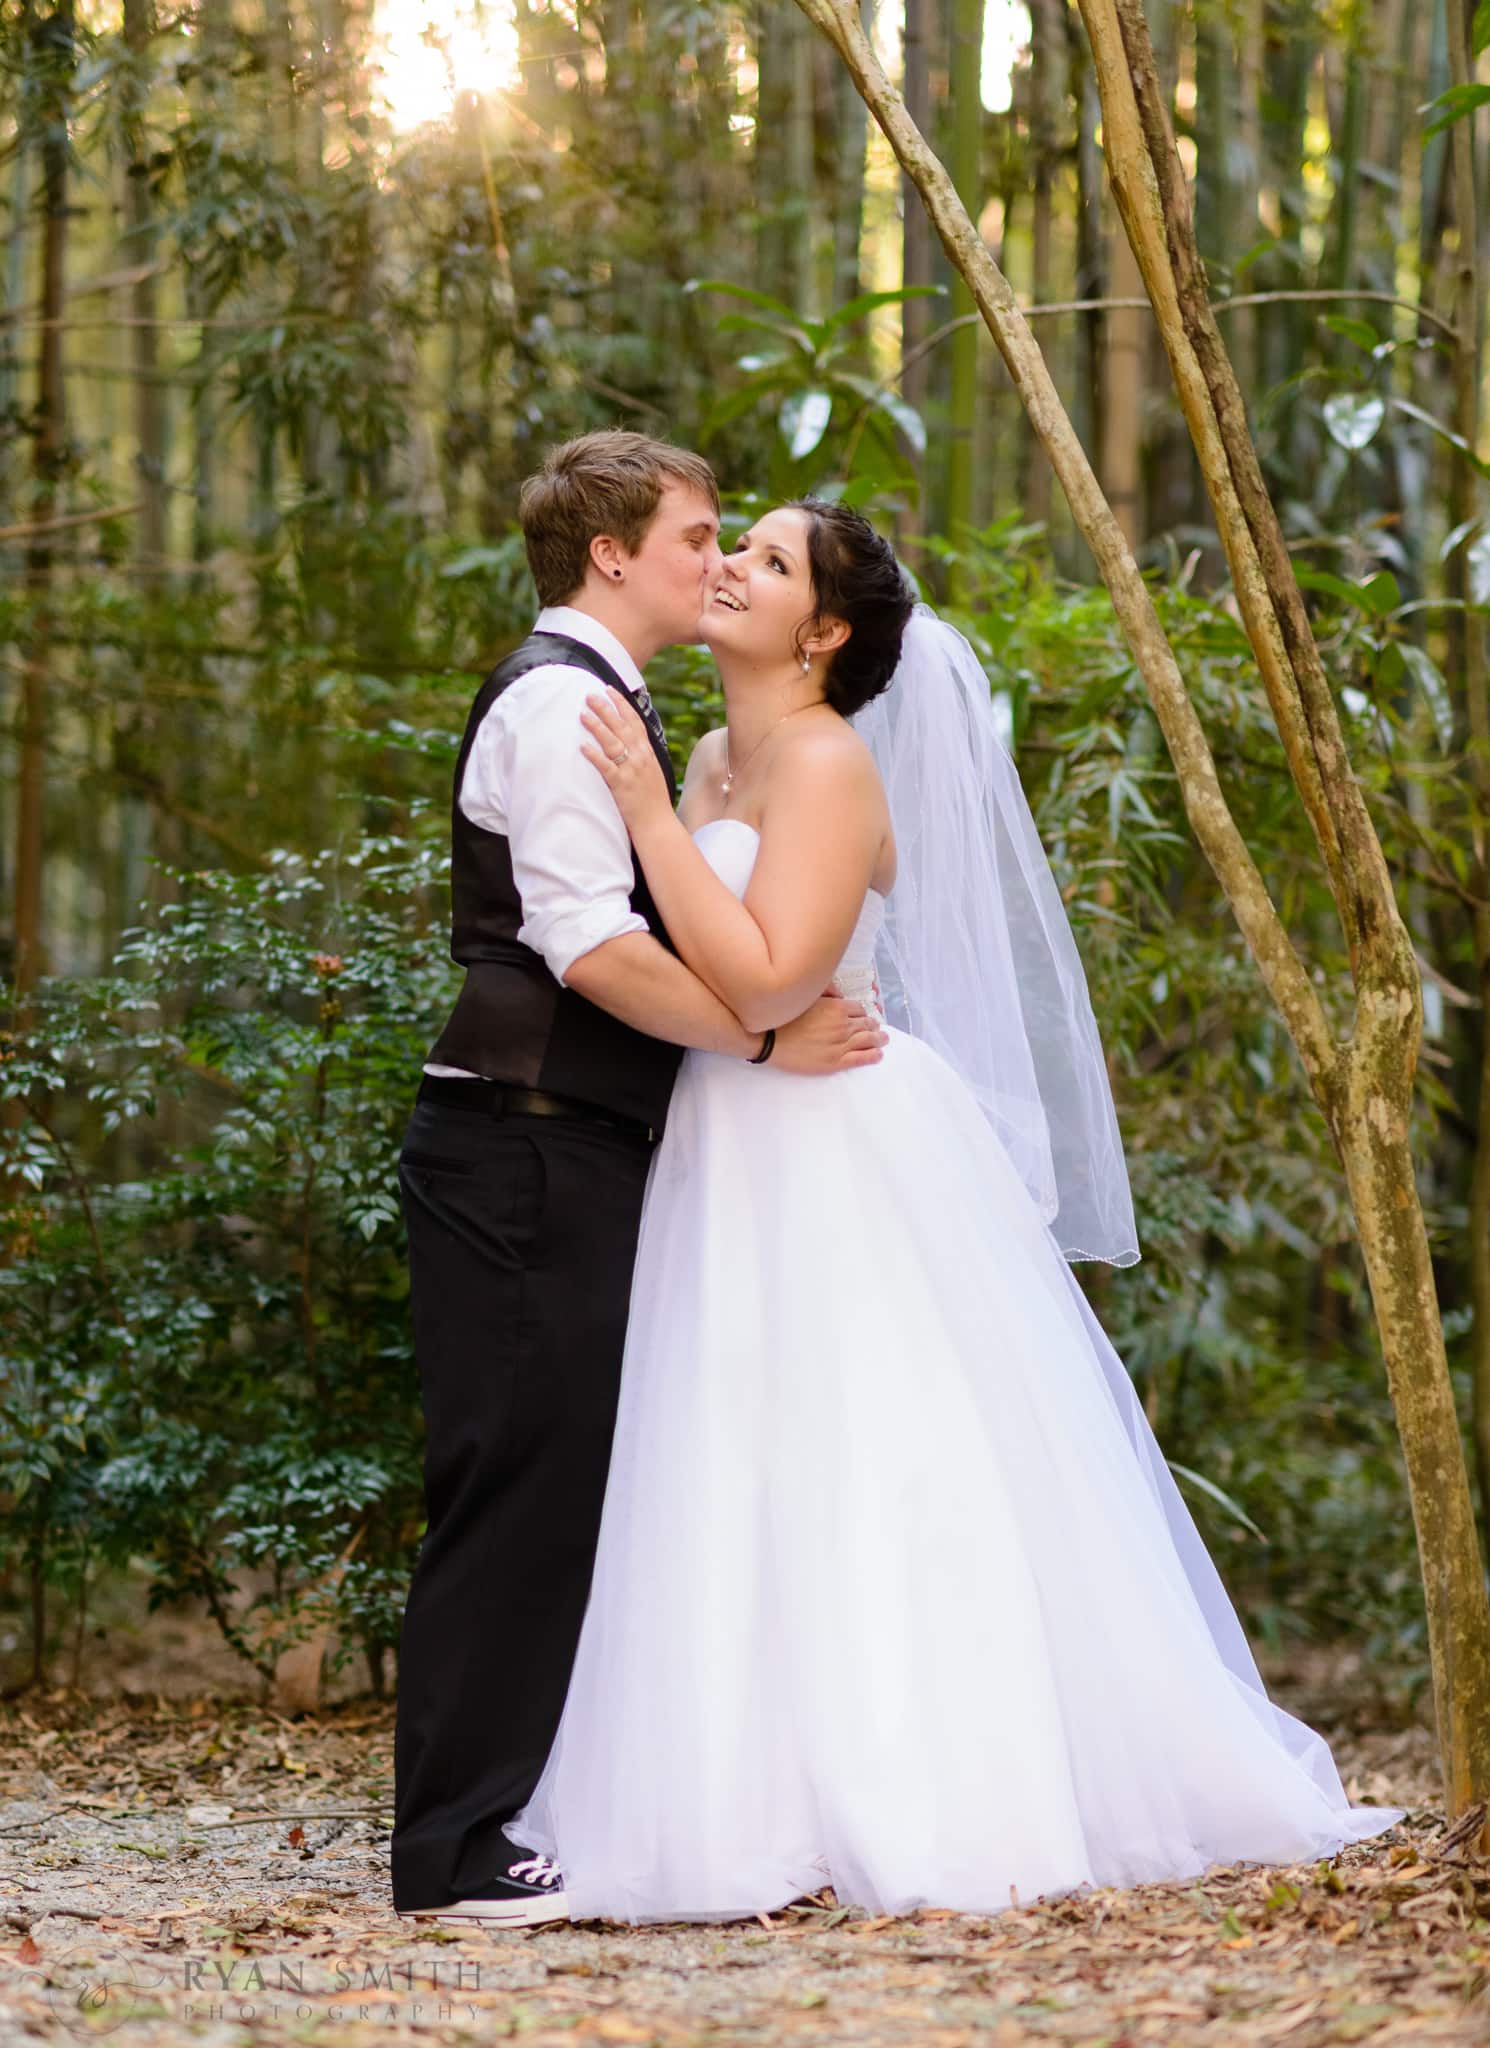 Bride and groom in the bamboo forest - Magnolia Plantation